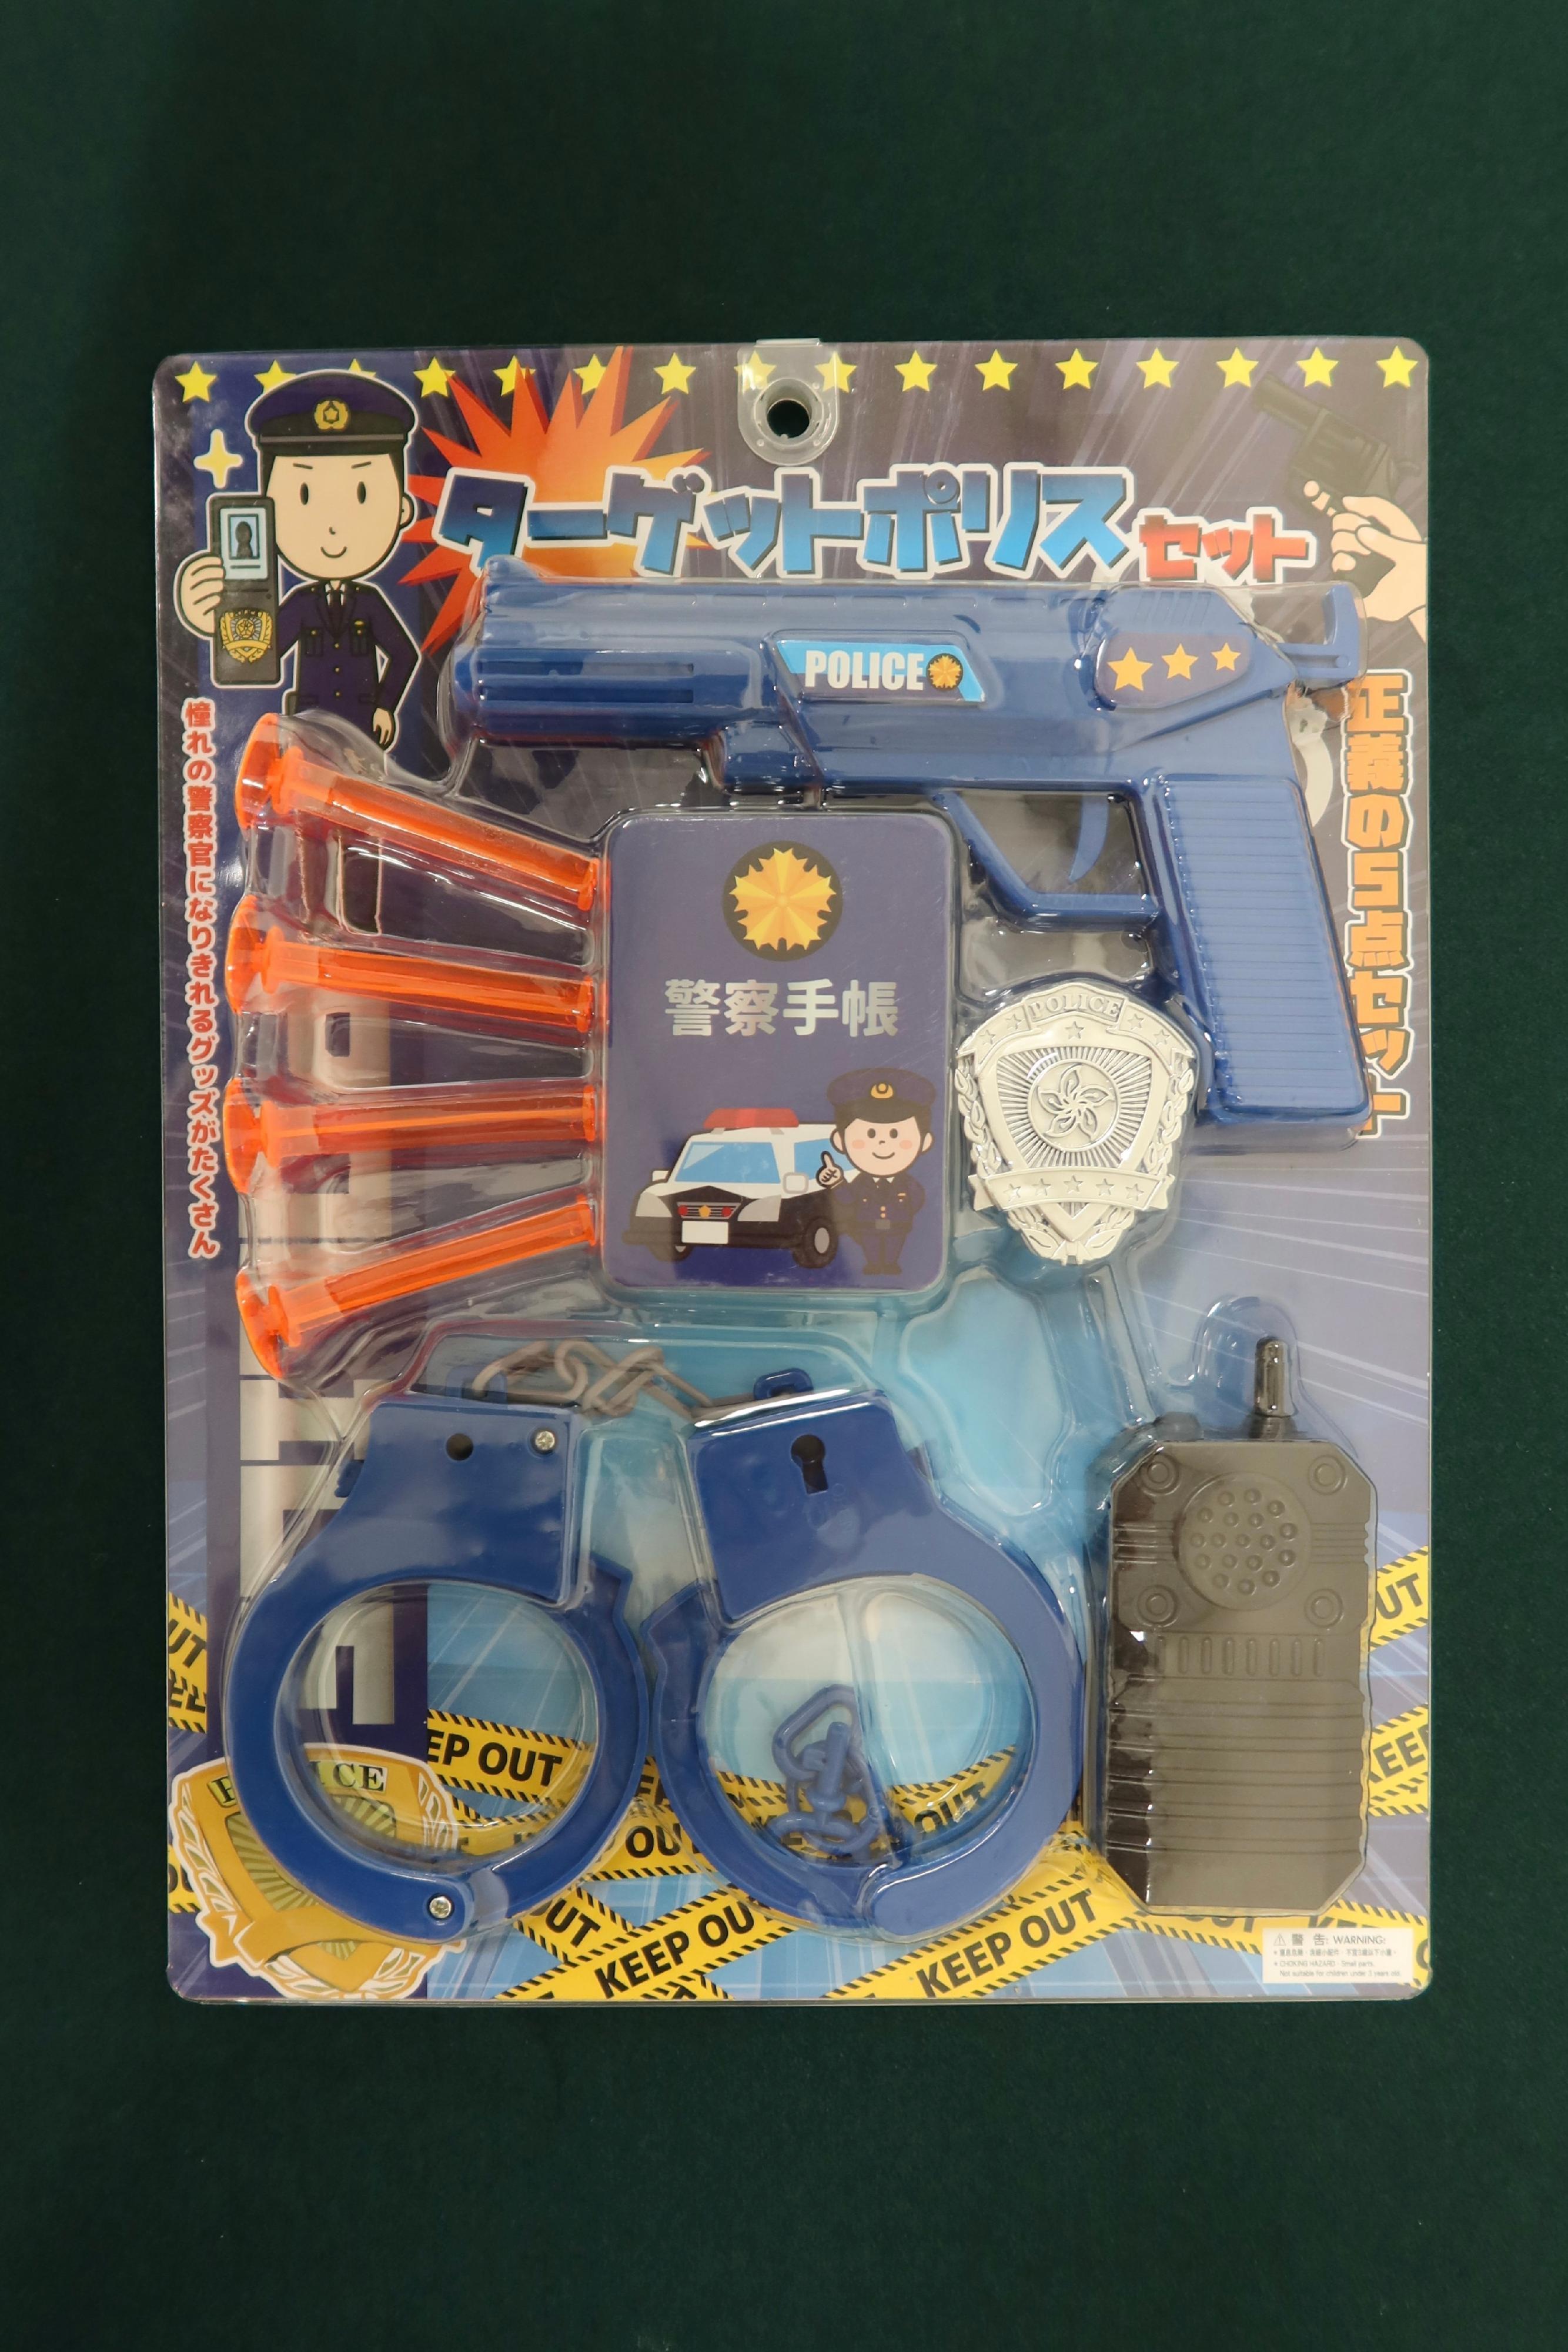 Hong Kong Customs today (July 6) reminded members of the public to stay alert to an unsafe model of a toy gun. Test results indicated that the toy gun could pose a risk of hurting children’s or other people’s eyes or faces. Photo shows the toy gun concerned.